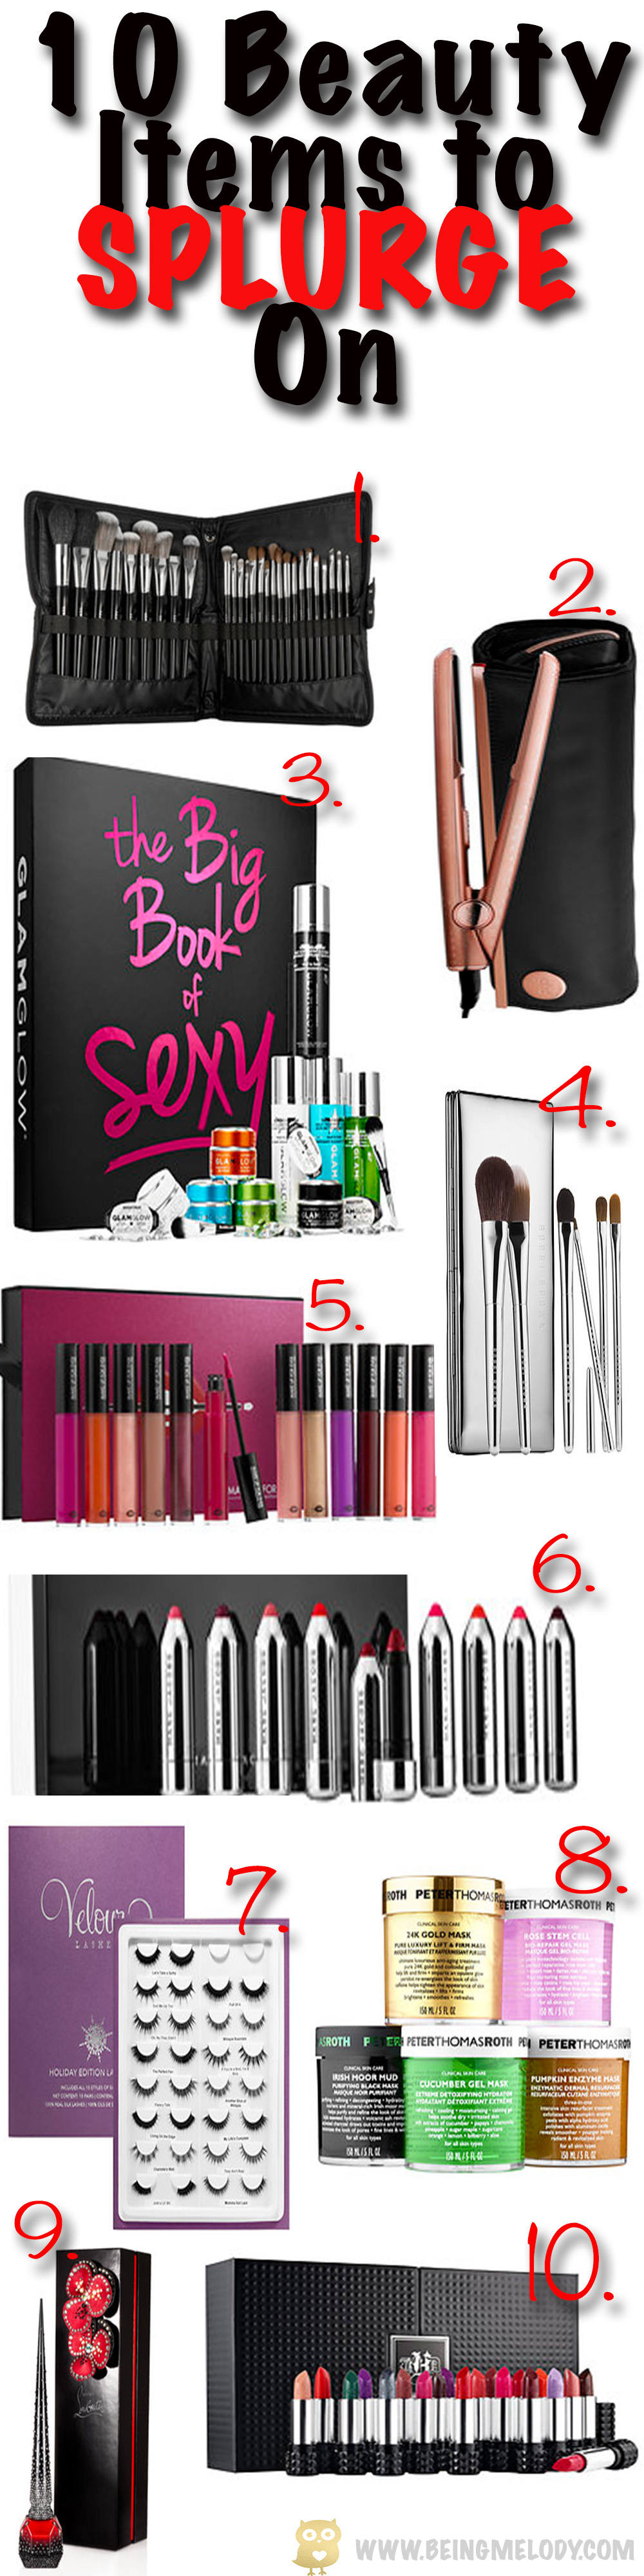 Ten Beauty items to splurge on when shopping the Sephora VIB Event. |BeingMelody.com| @beingmelody